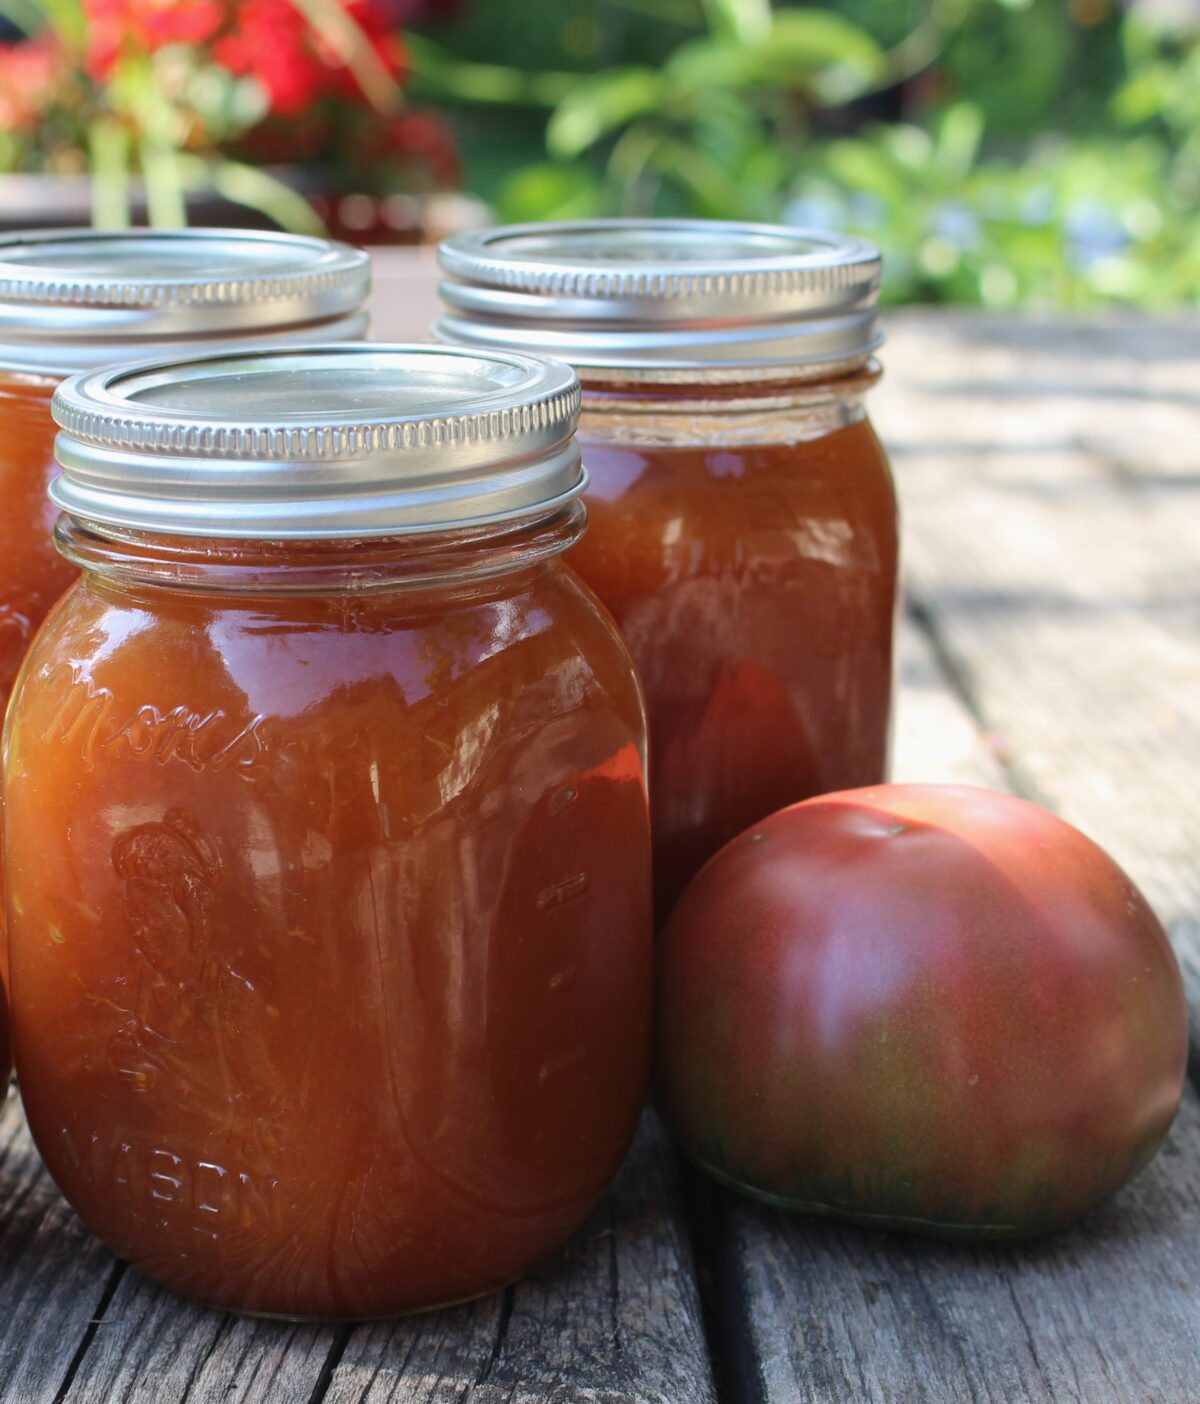 This vegetable-tomato juice blend is a sip of summer in a jar. (Stephanie Thurow)